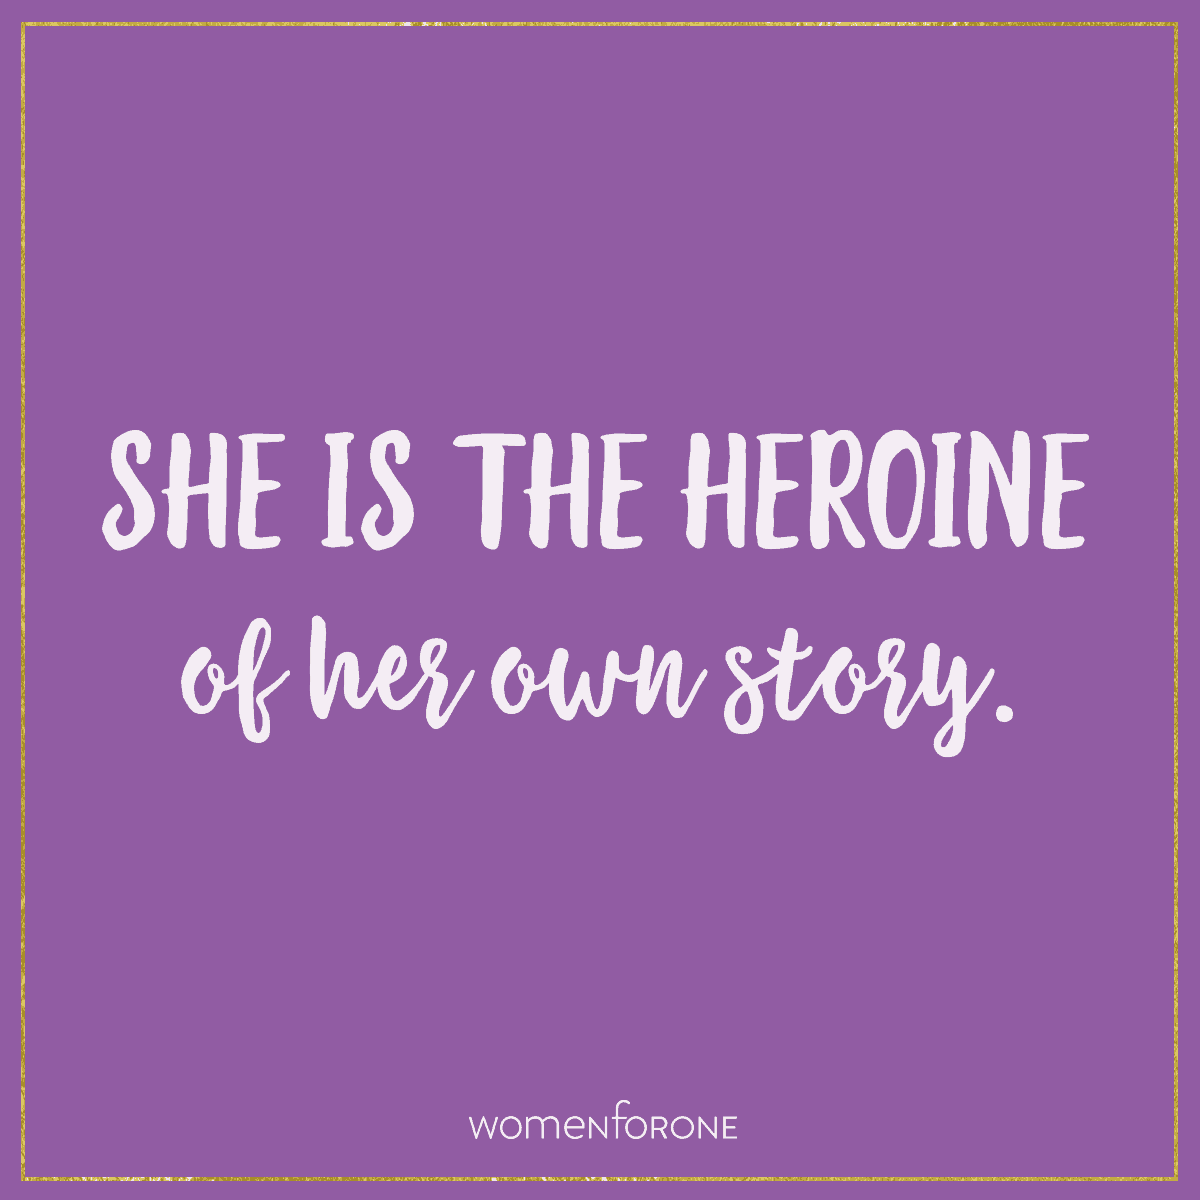 She is the heroine of her story.